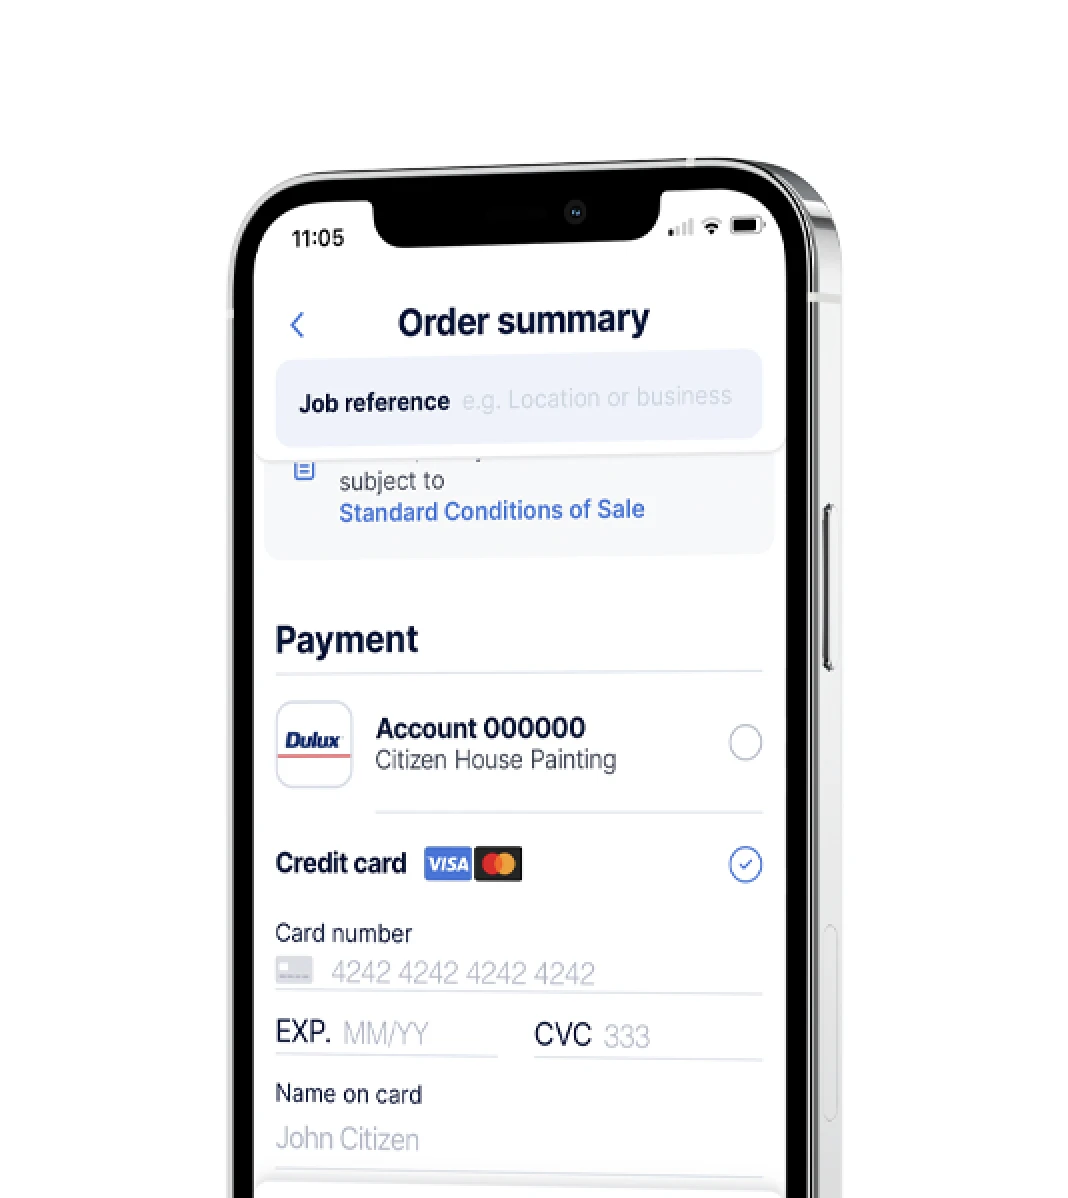 Trade Direct App order summary screen showing pay by card on a mobile